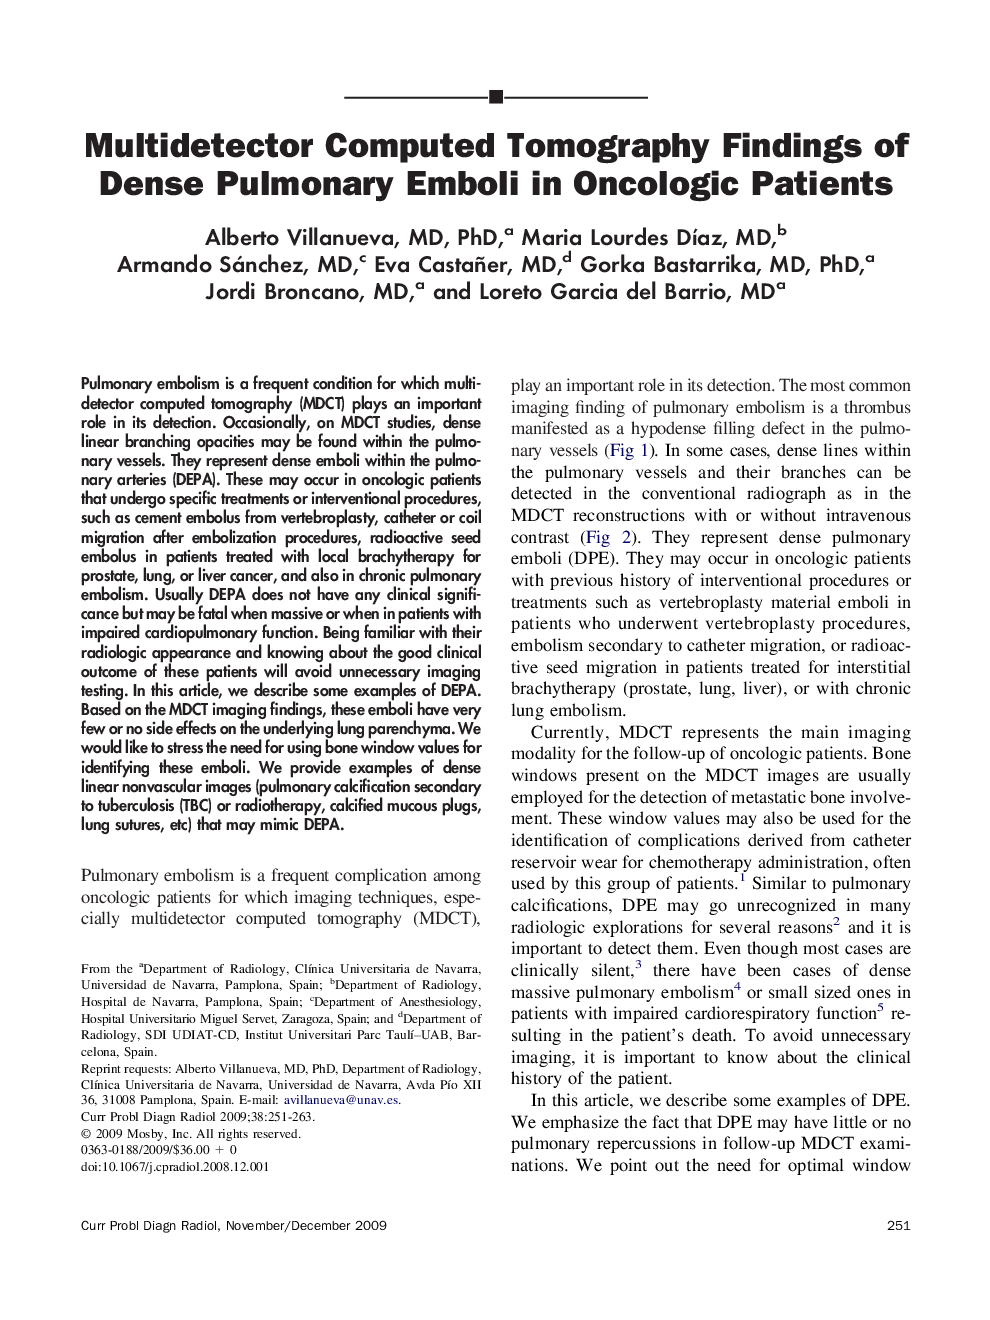 Multidetector Computed Tomography Findings of Dense Pulmonary Emboli in Oncologic Patients